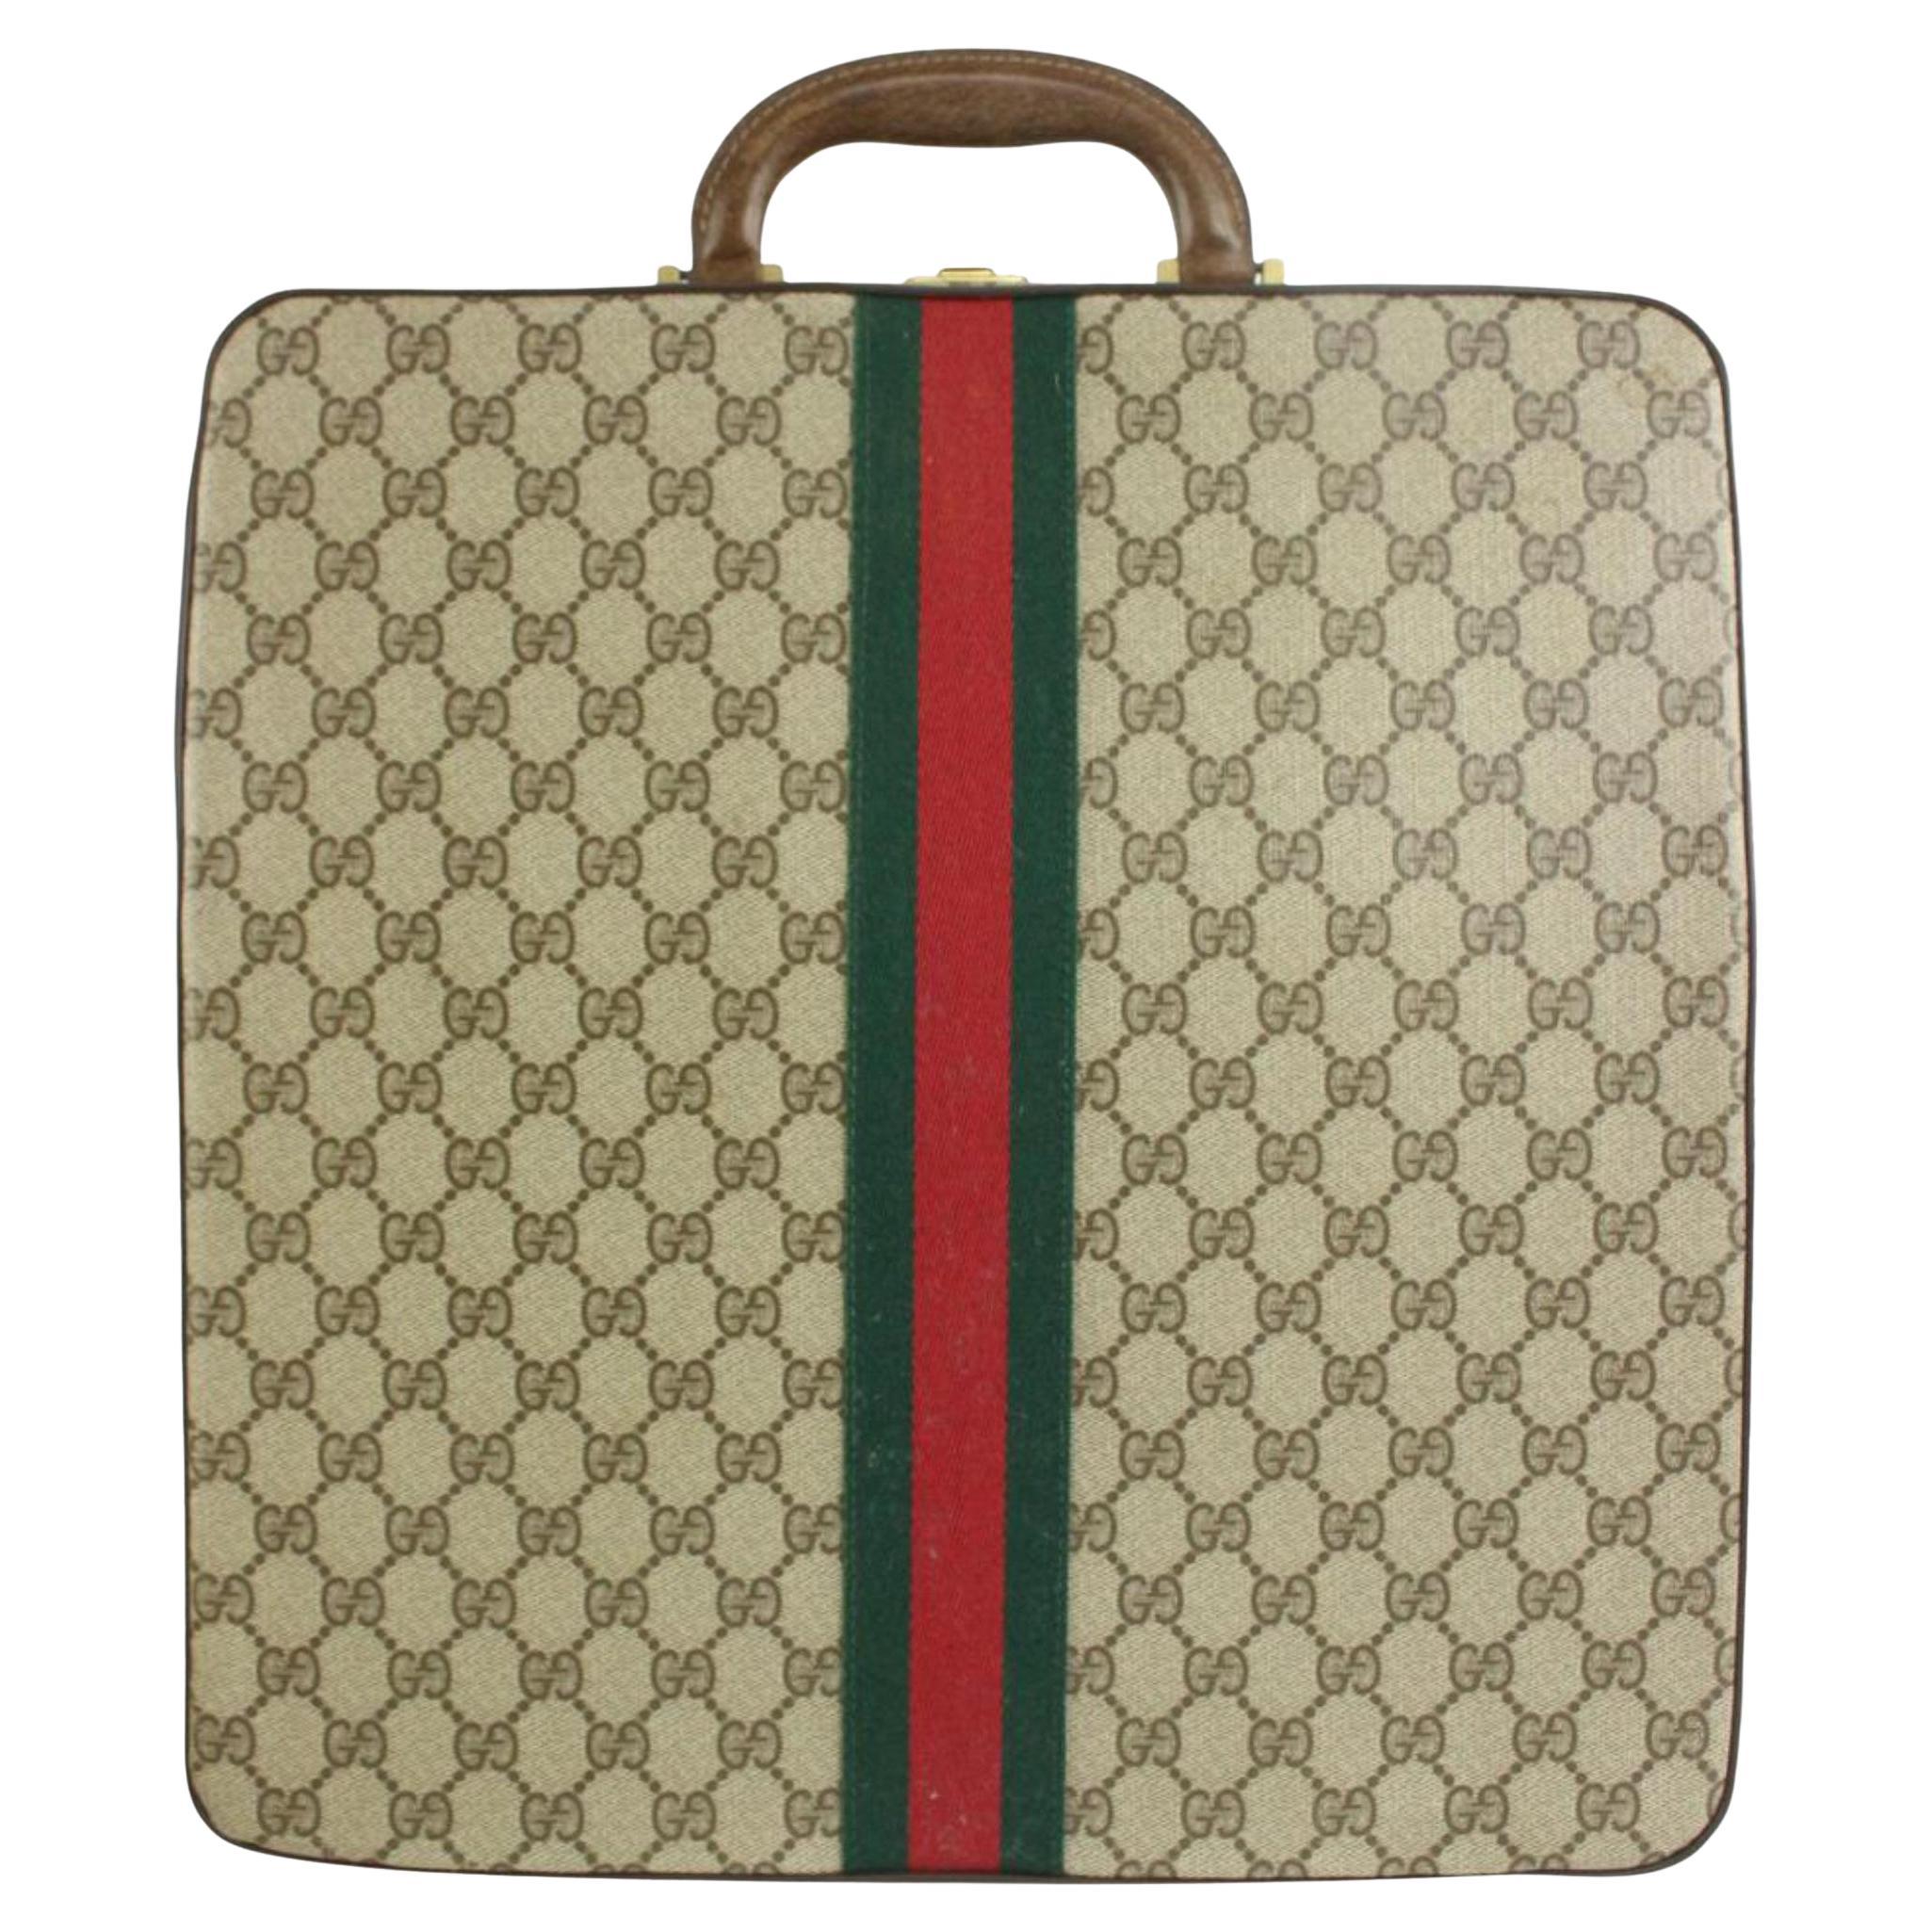 Gucci Travel Case - 6 For Sale on 1stDibs